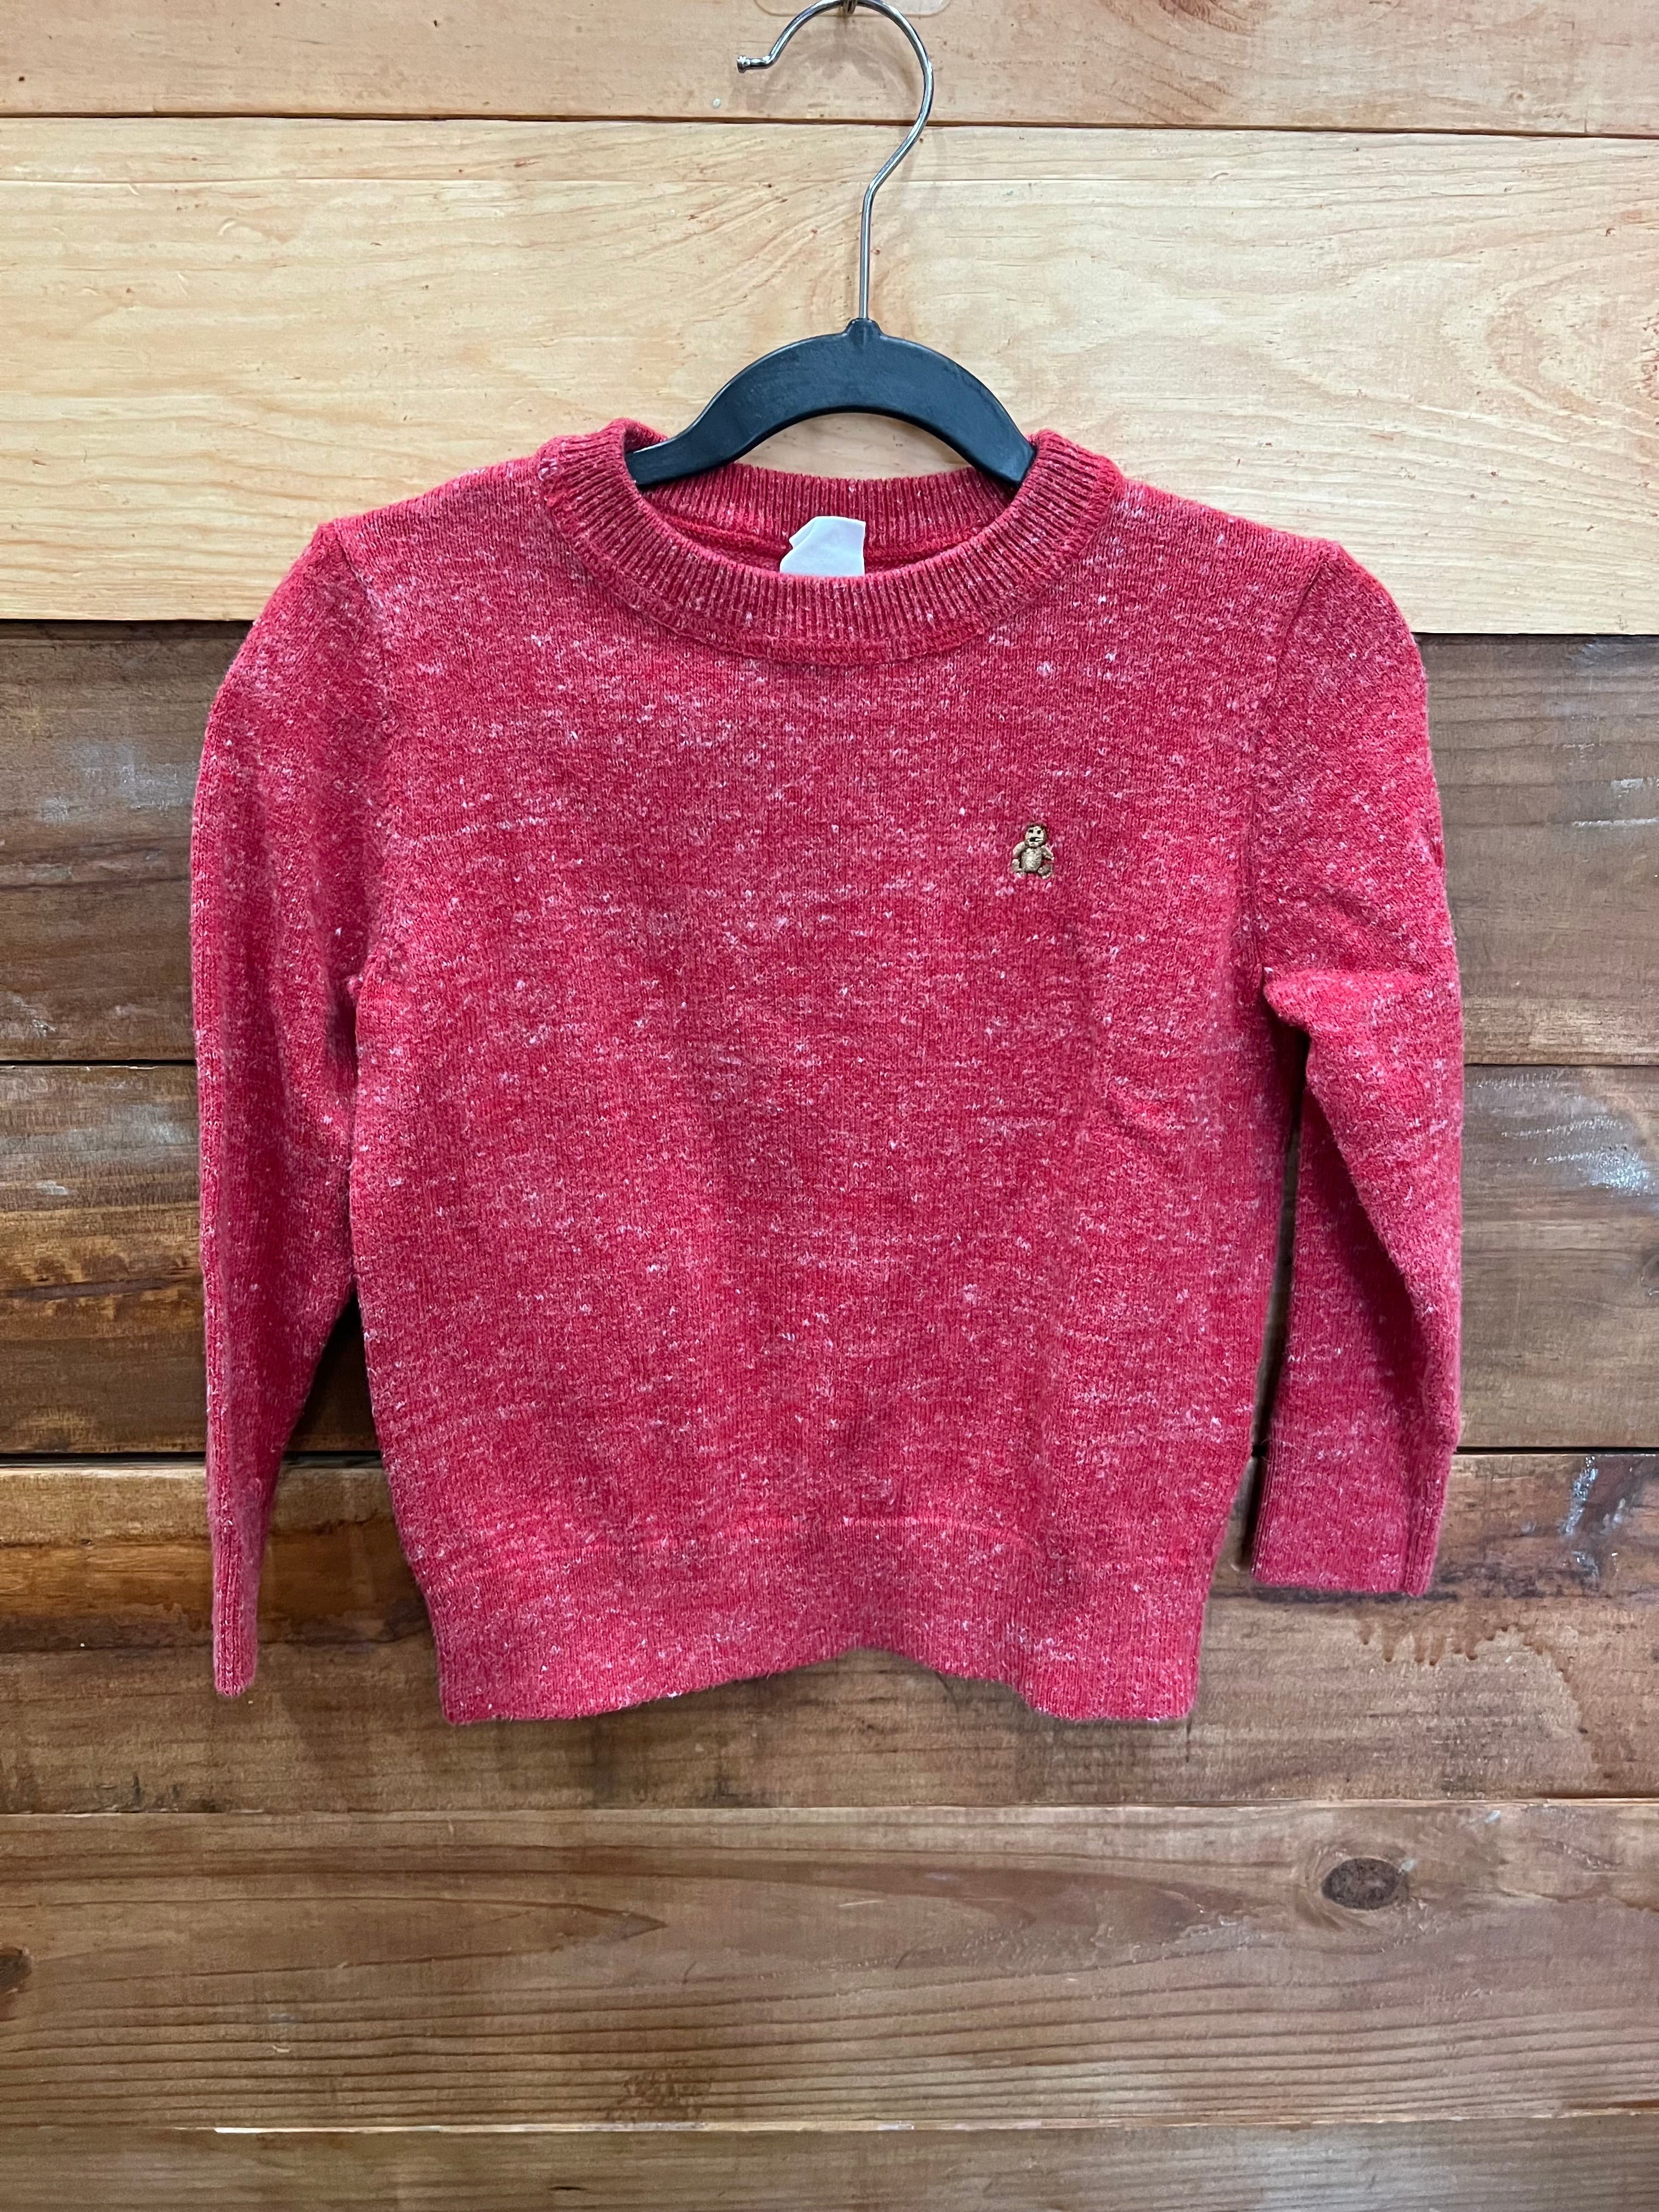 Sicily Sweater Red Sweater Red Pullover Bubble Sweater Sweater With Dots  Merino Wool Sweater Winter Sweater Polka Dots Sweater 